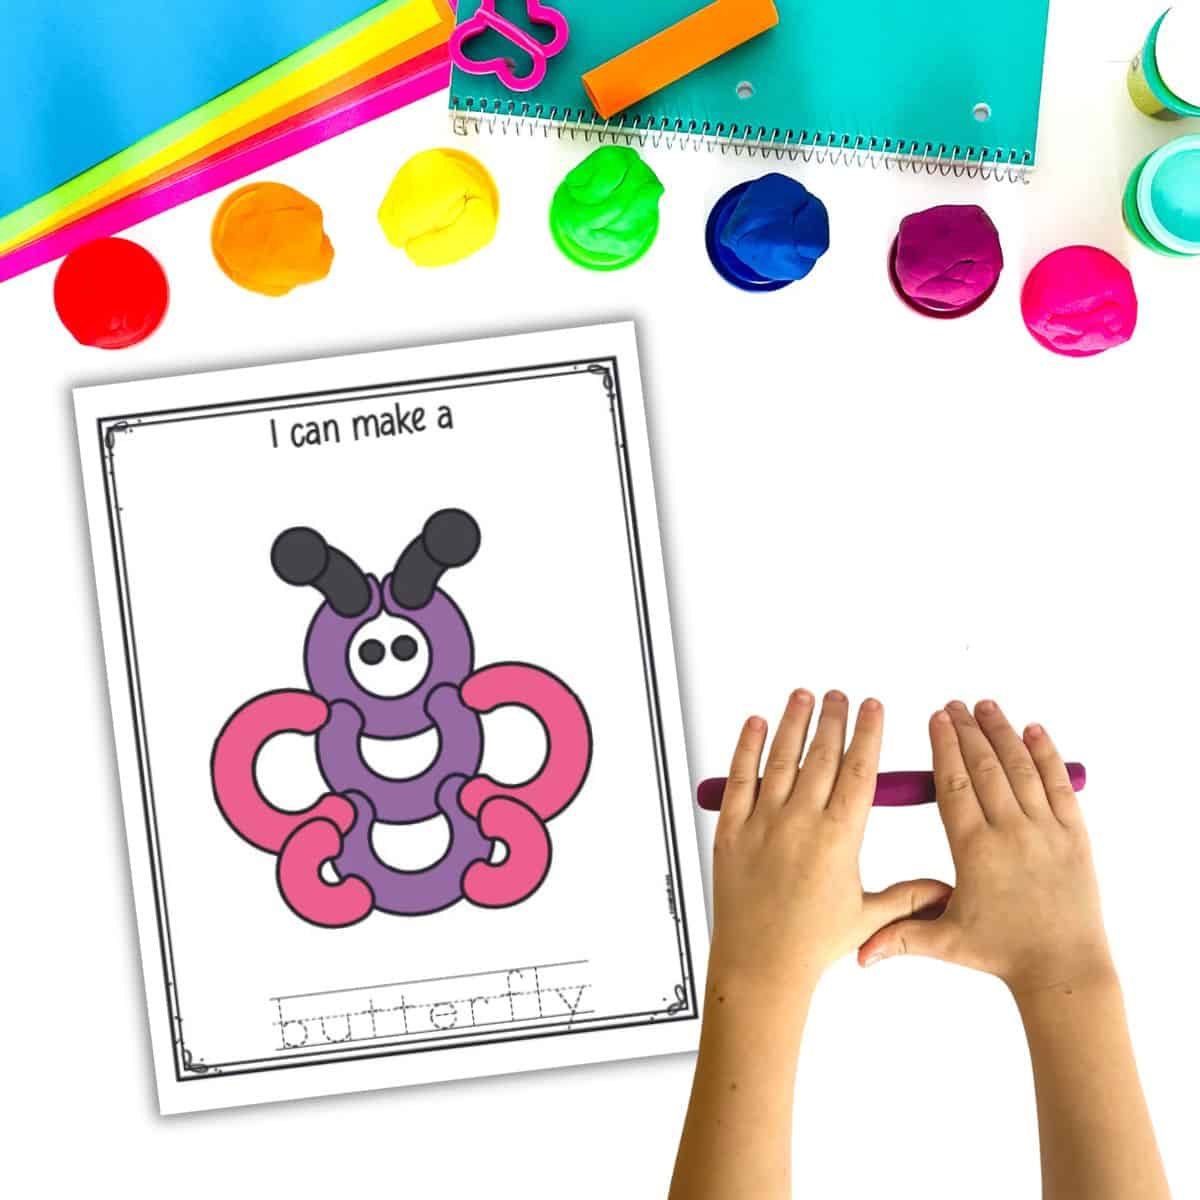 A play dough mat with a butterfly shown with containers of play dough a pair of hands rolling out a play dough snake